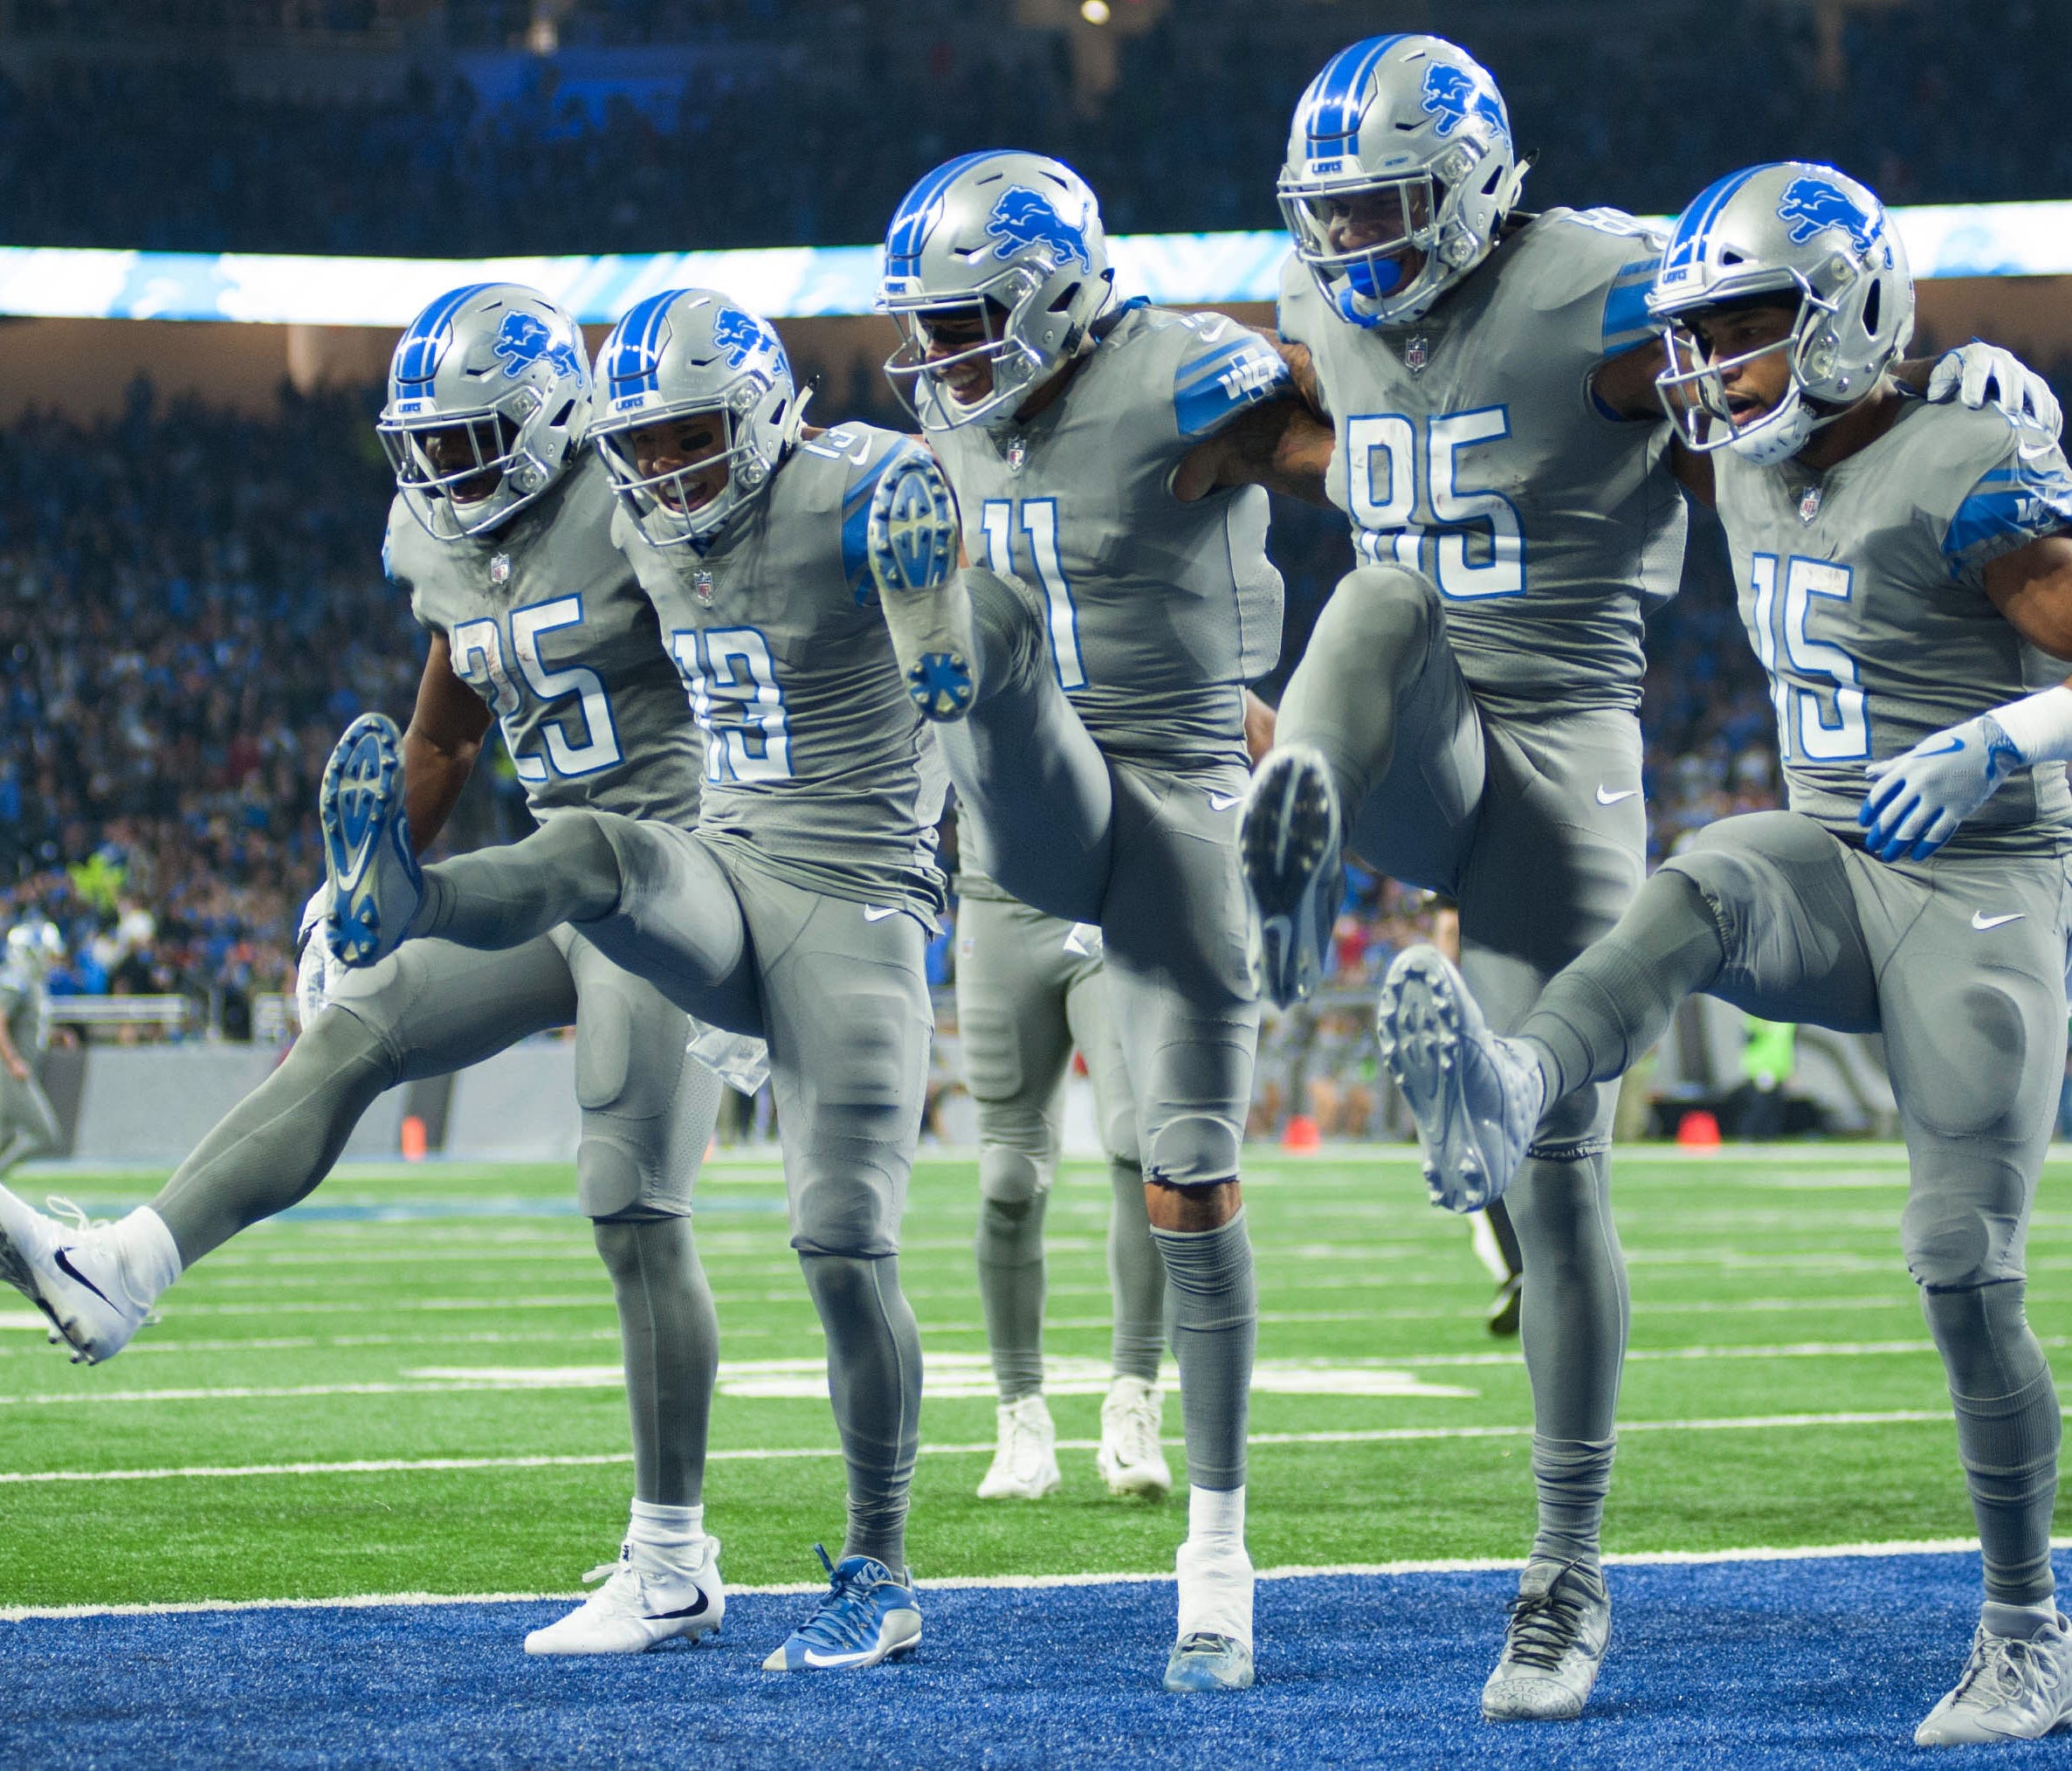 Detroit Lions wide receiver T.J. Jones (13) celebrates his touchdown with running back Theo Riddick (25) wide receiver Marvin Jones (11) tight end Eric Ebron (85) and wide receiver Golden Tate (15) during the second quarter against the Chicago Bears 